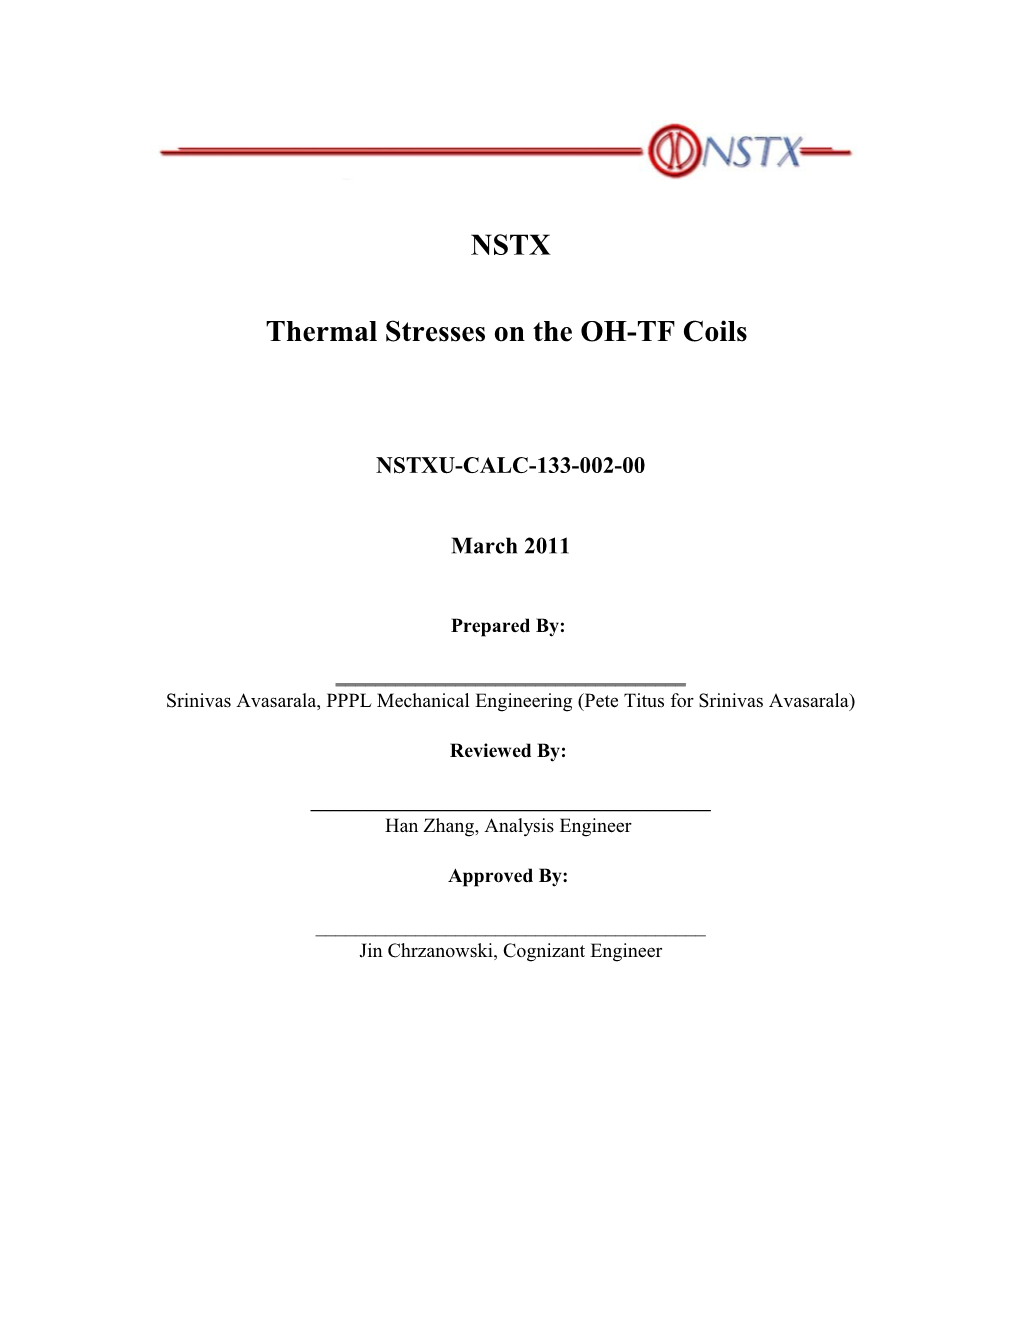 Thermal Stresses on the OH-TF Coils